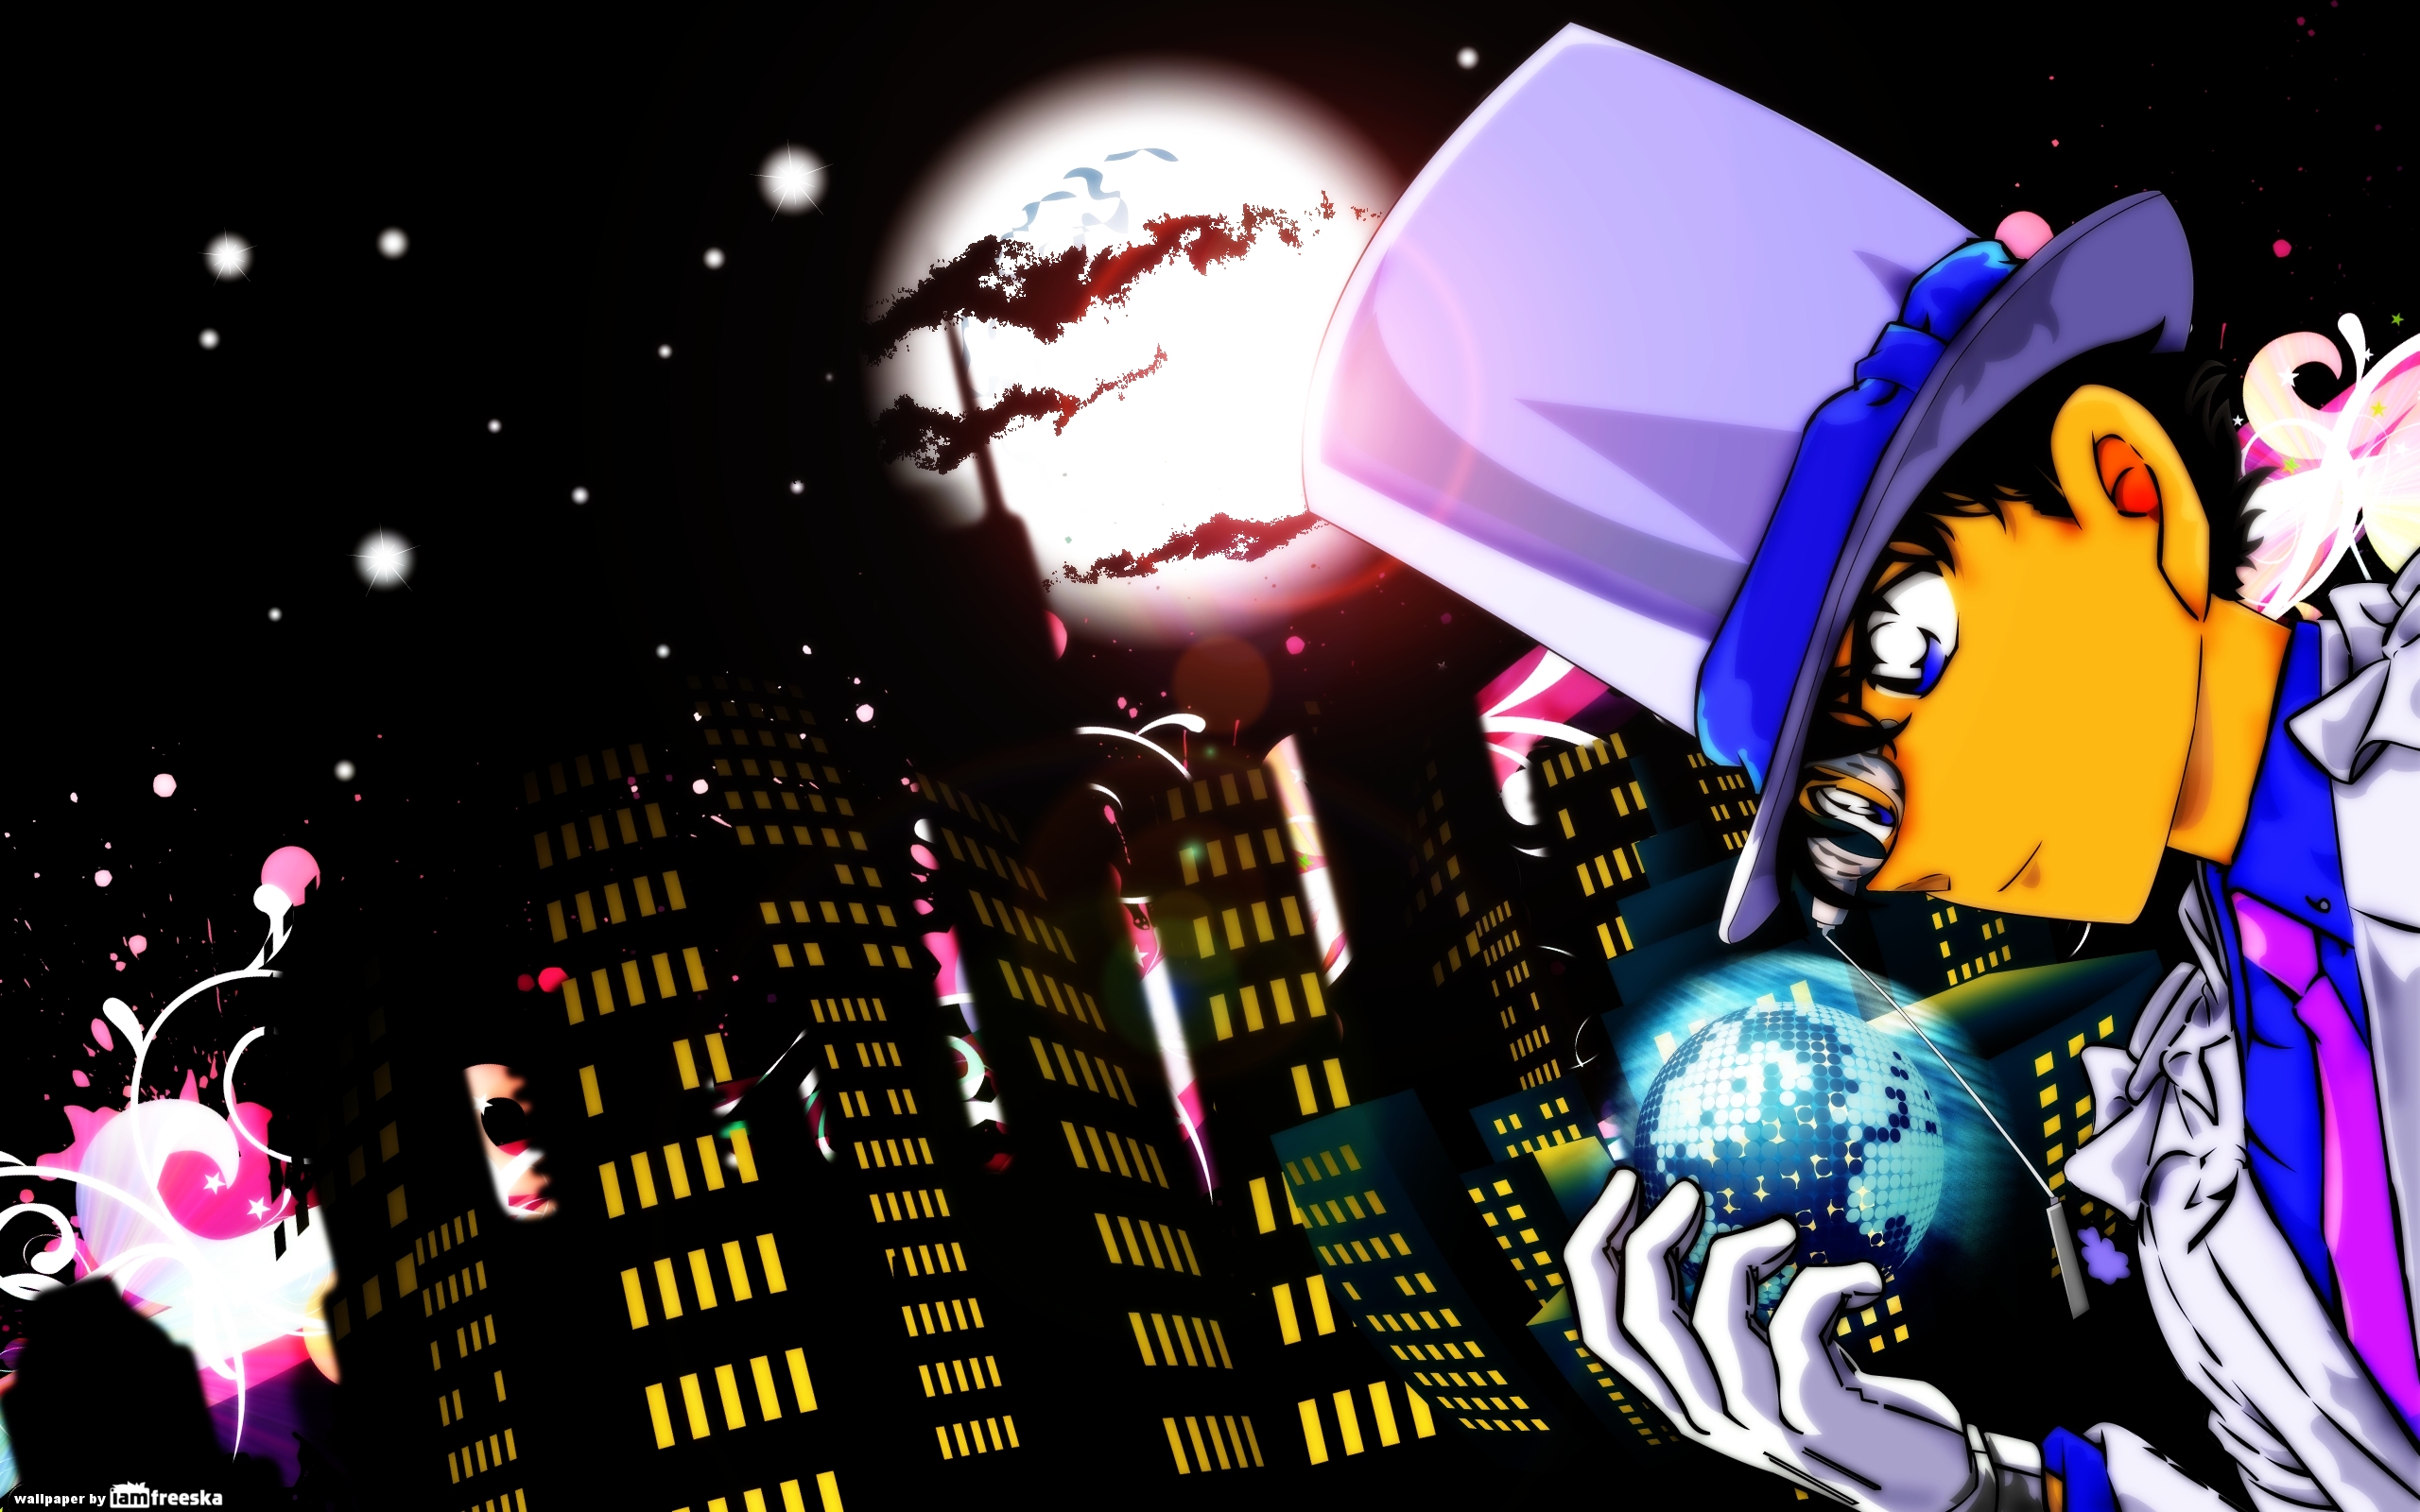 kaito kid wallpaper hd,graphic design,cartoon,illustration,fictional character,space